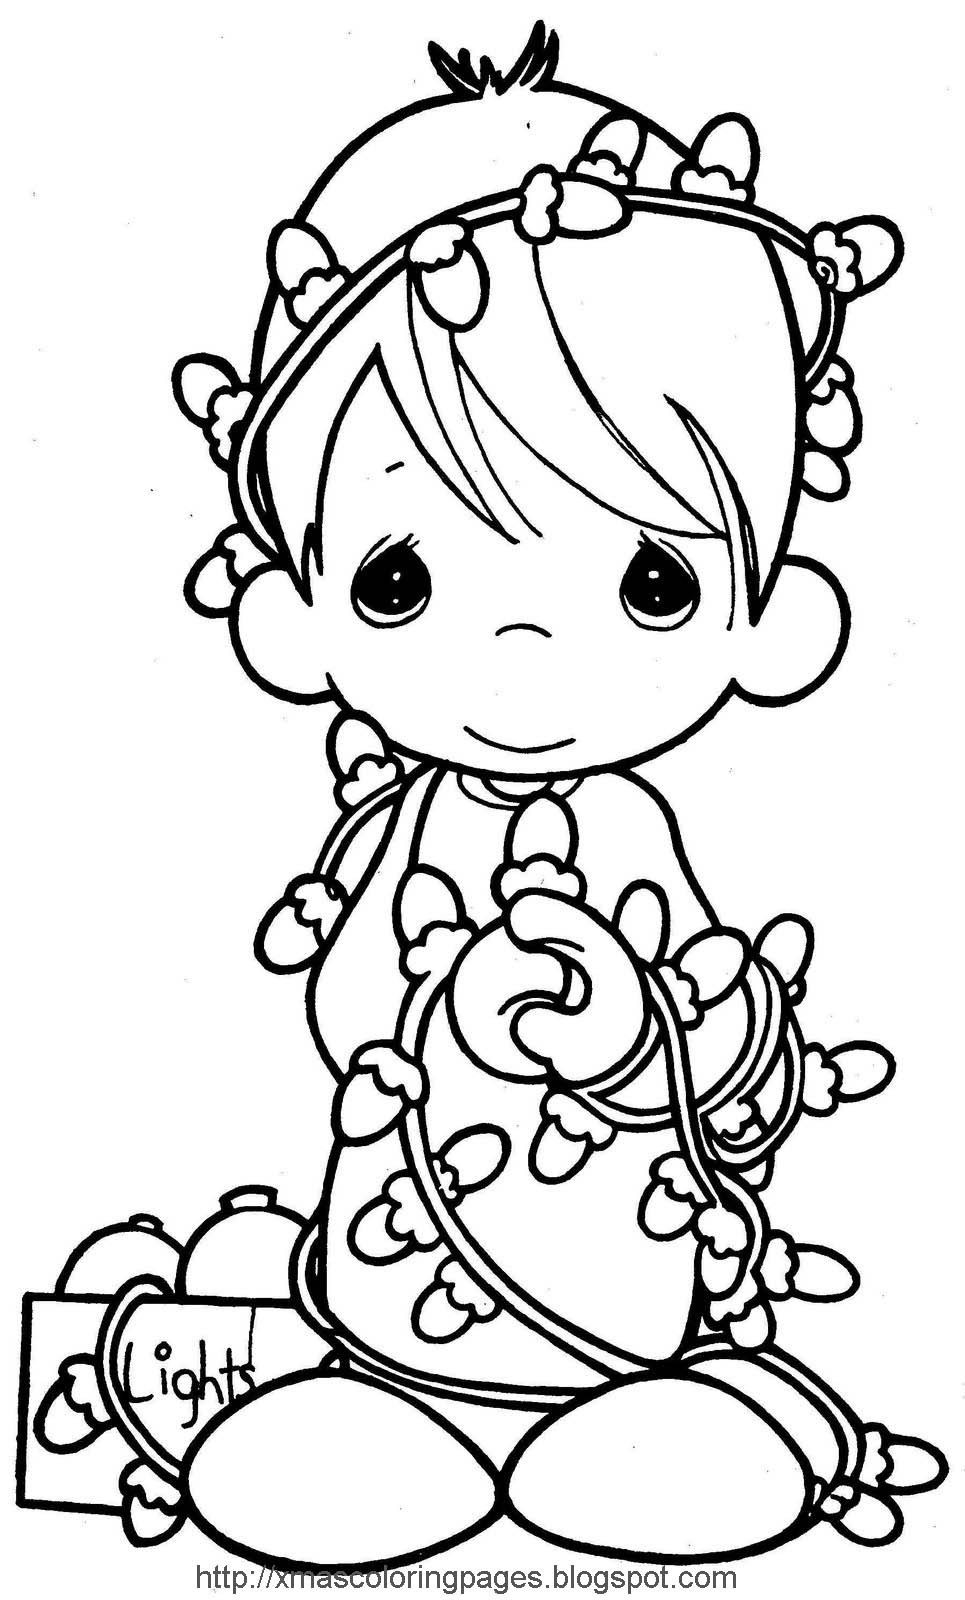 Printable Christmas Coloring Pages
 